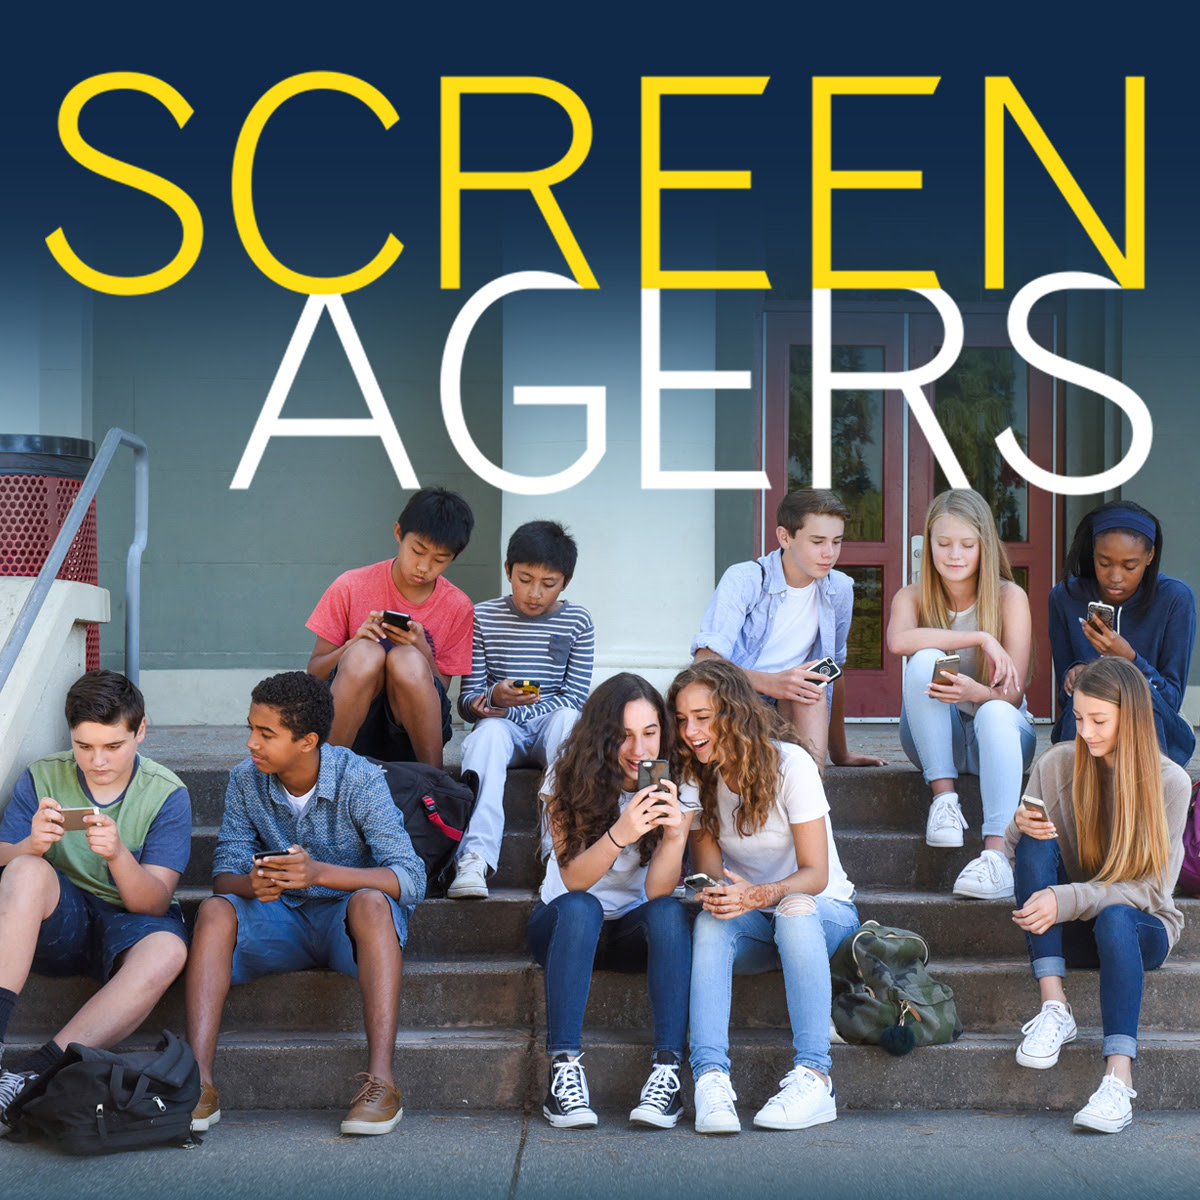 Screenagers Film Presented By Westminster Reformed Presbyterian Church